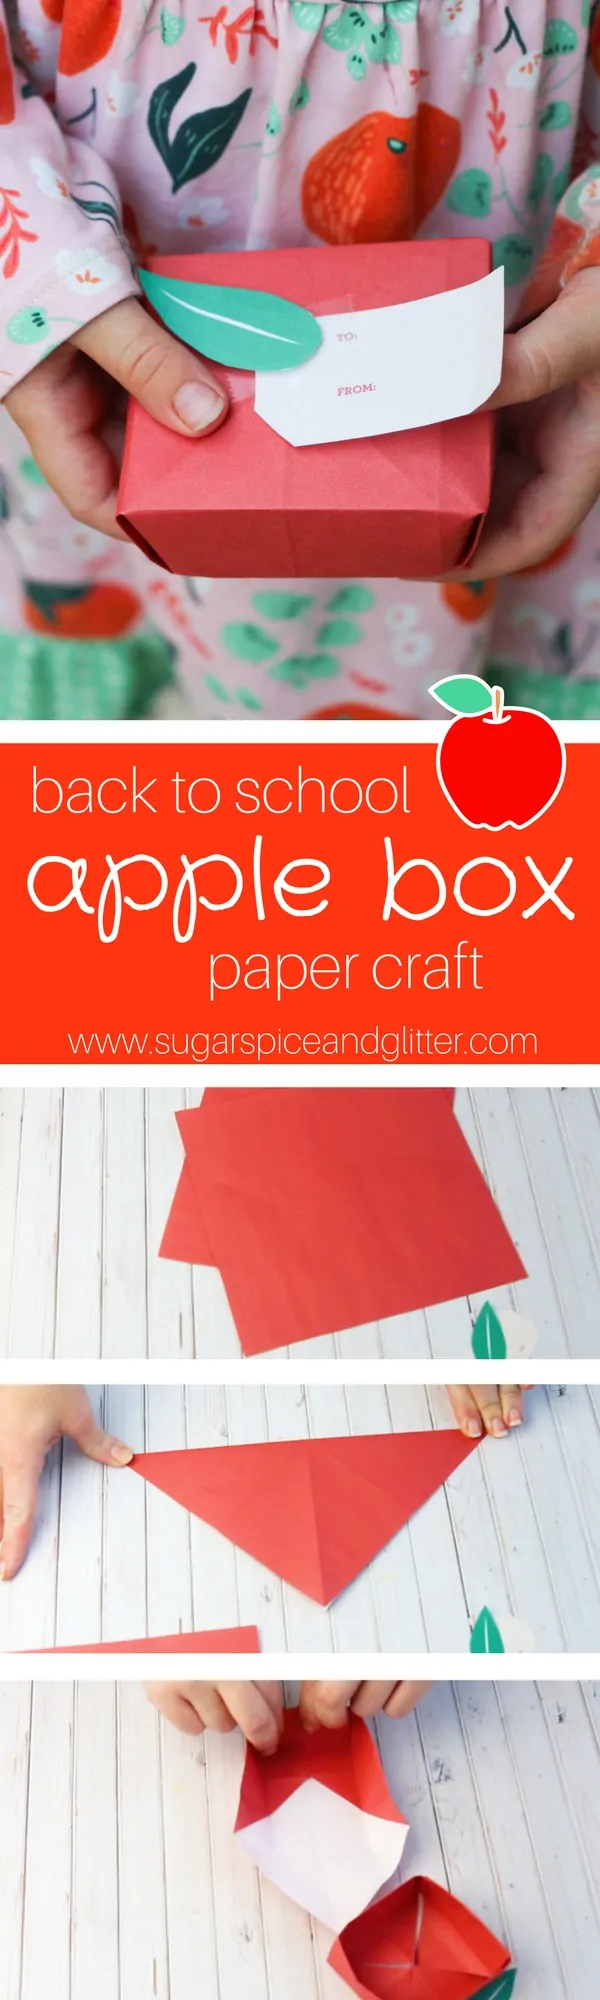 Apple Box Craft for Back to School - an easy first origami project